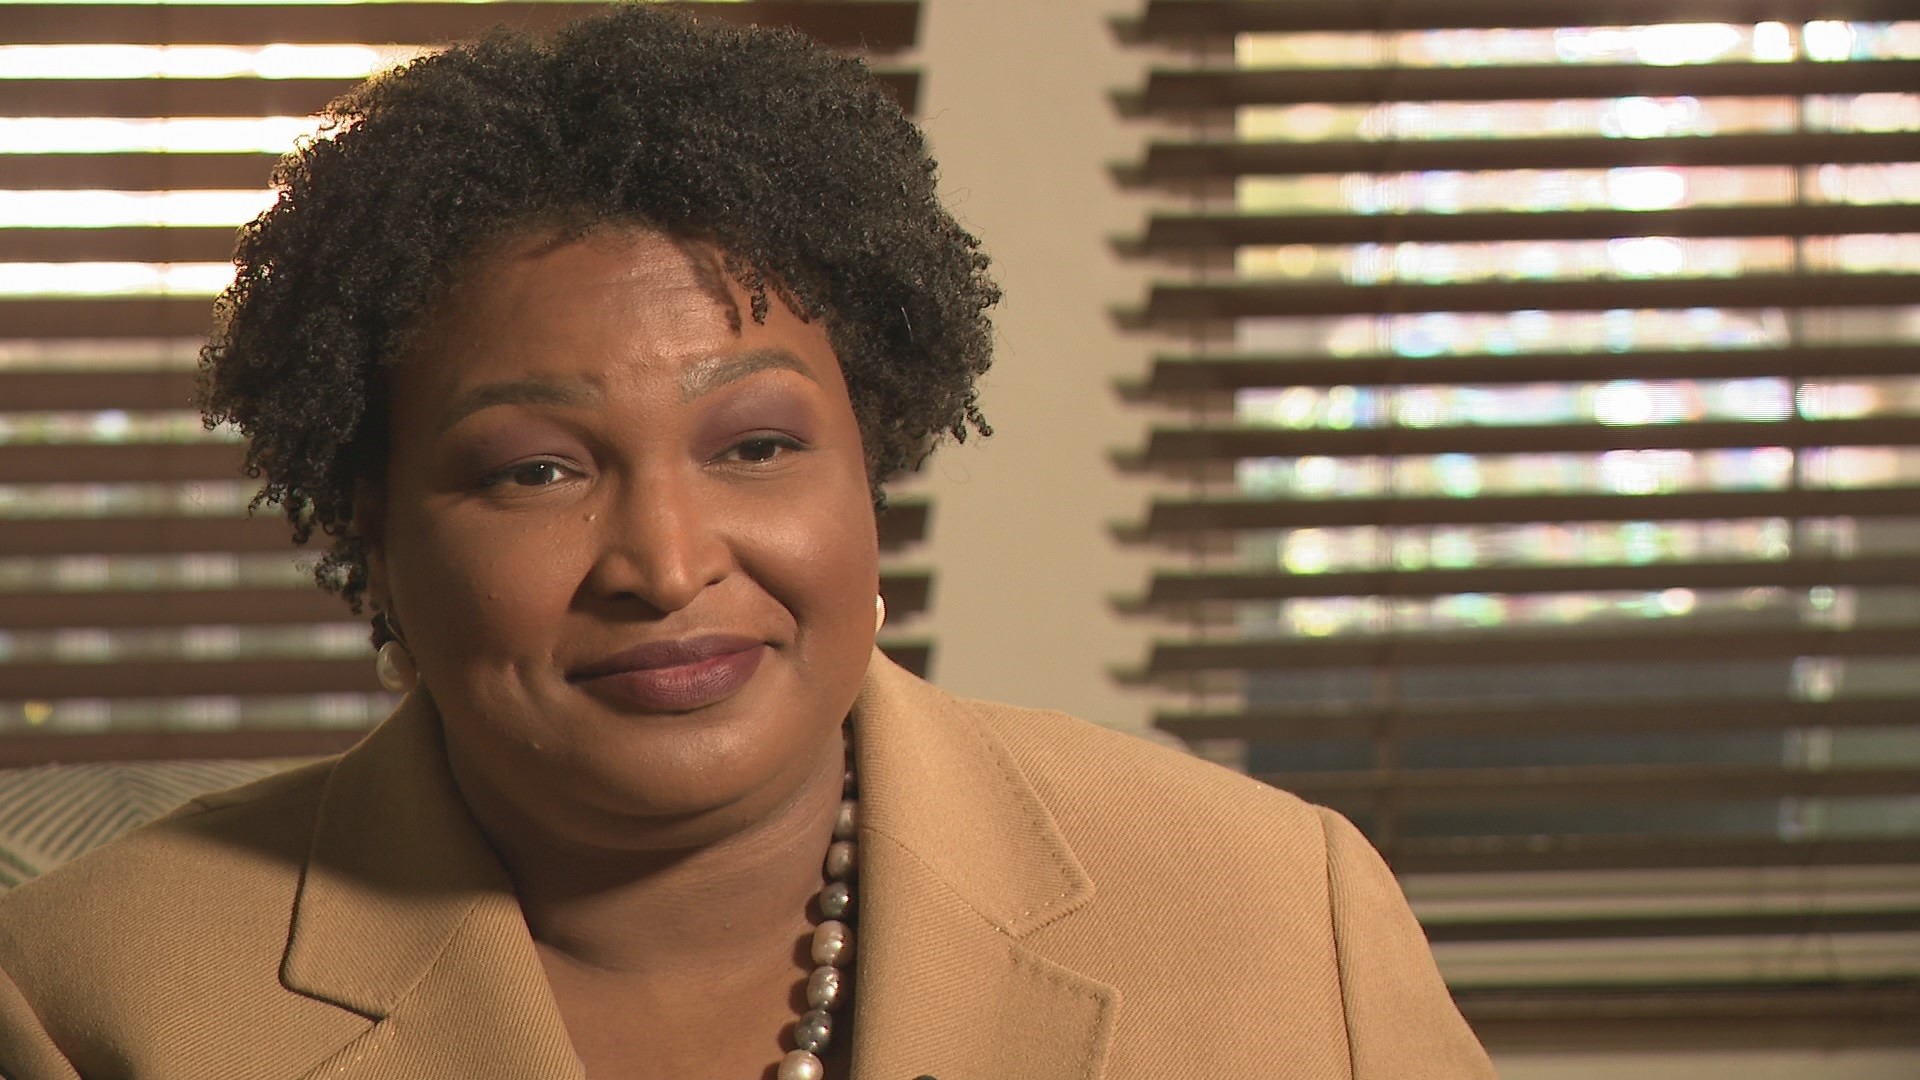 Less than 24 hours after announcing her bid to run for Abrams sat down with 11Alive to talk about the past, present, and her future for the state should she win.